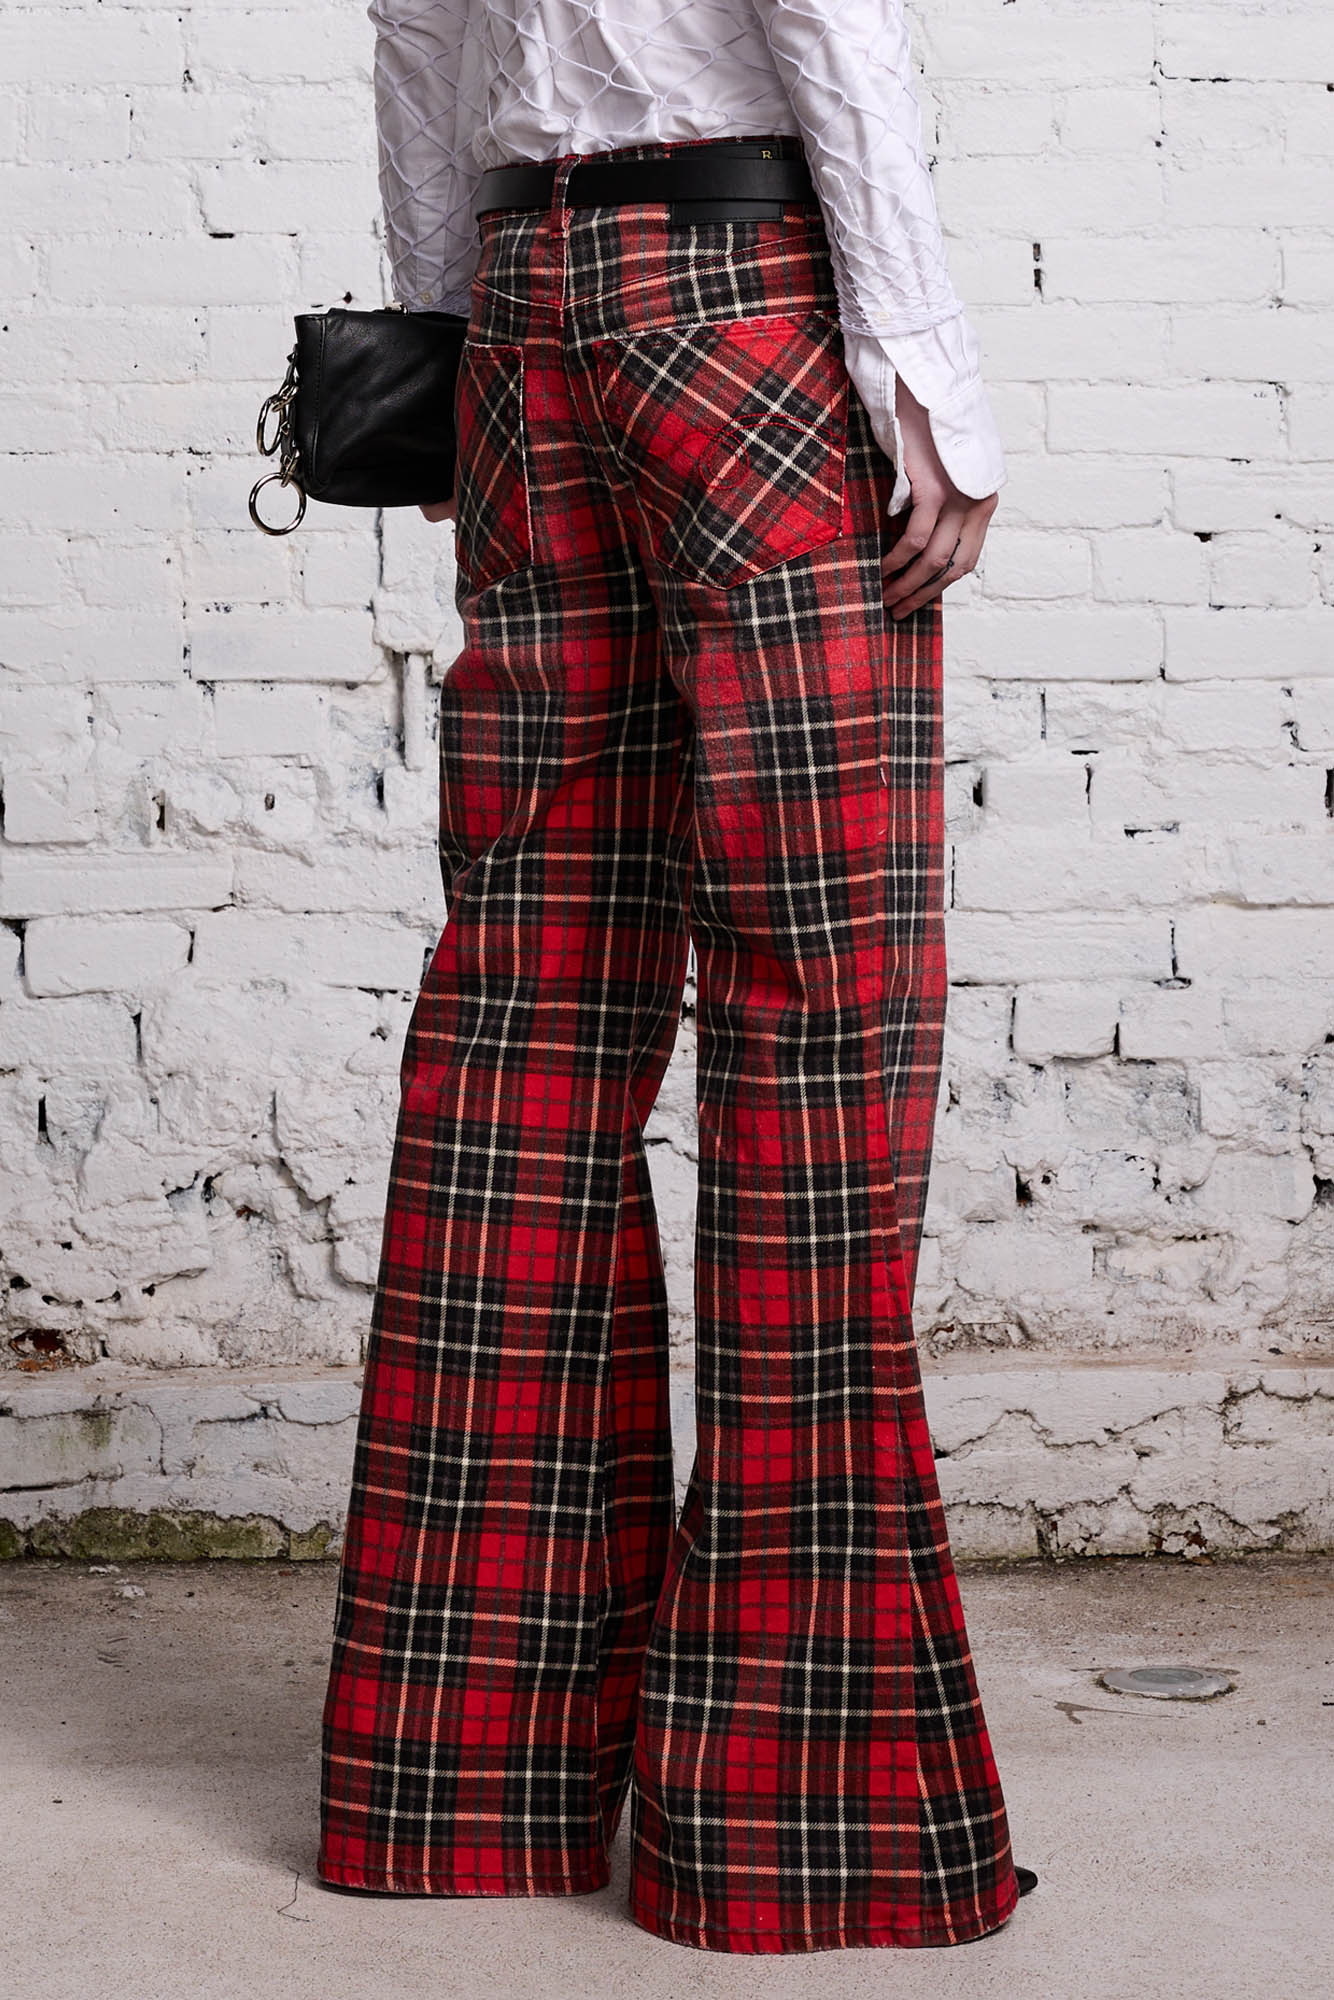 JANET JEAN - RED PLAID